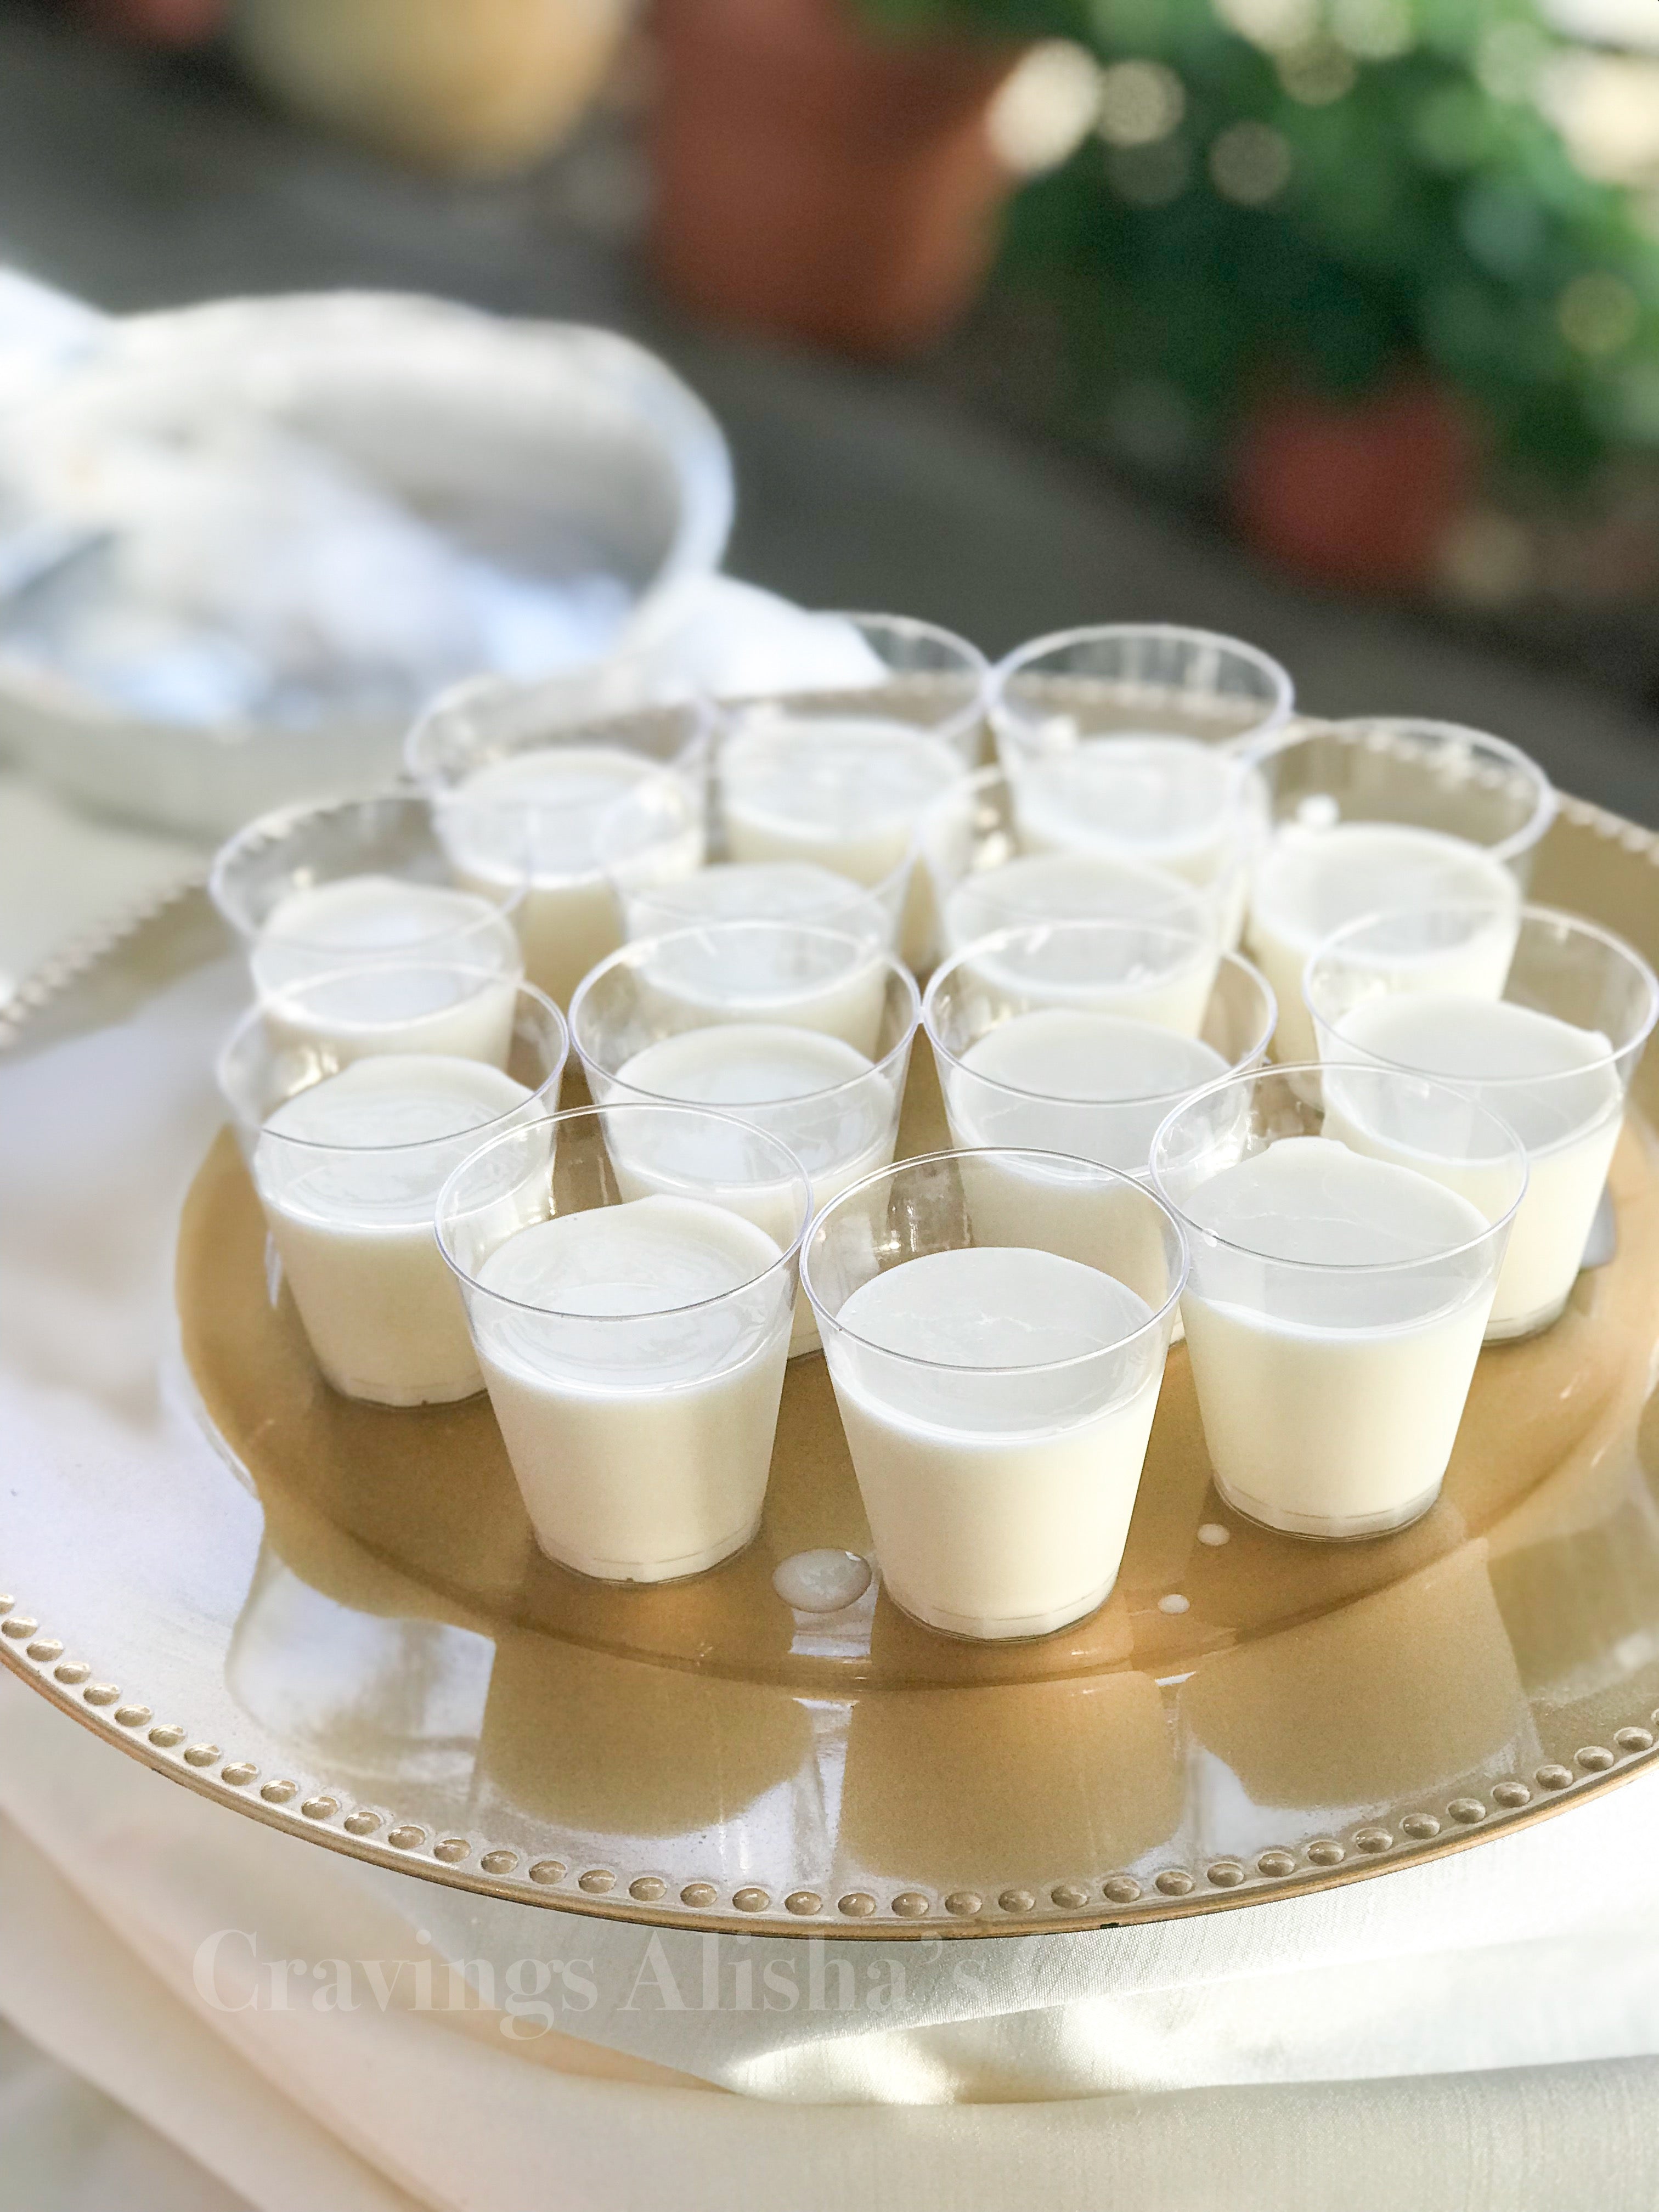 ⭐️All inclusive Catering Mini Chocolate Chip Cookies + milk shots